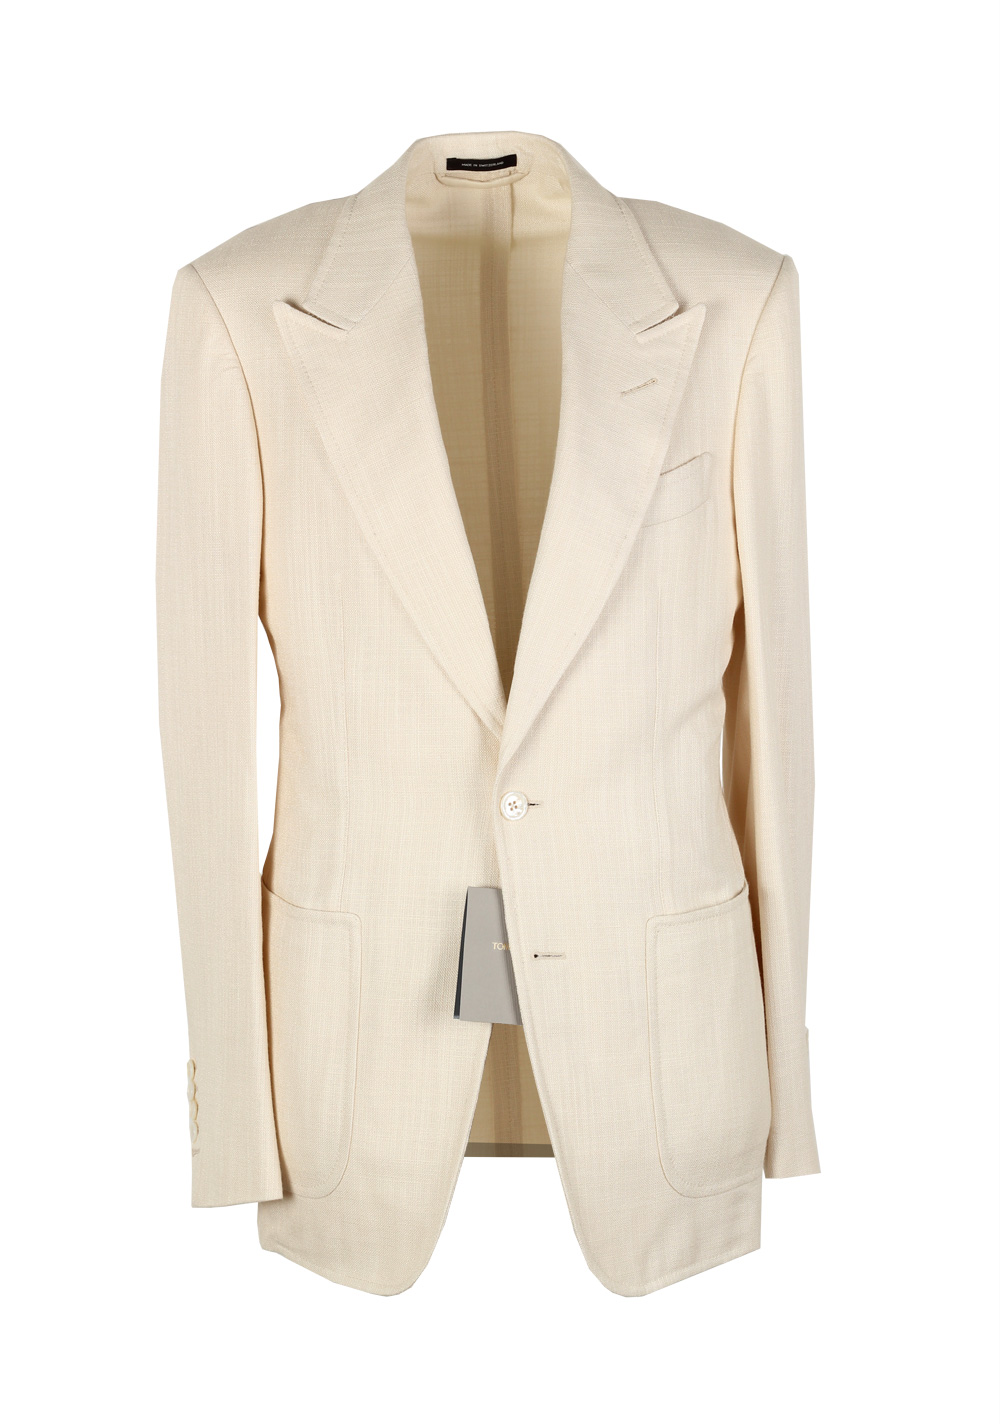 TOM FORD Shelton Cream Suit Size 46 / 36R U.S. In Rayon | Costume Limité